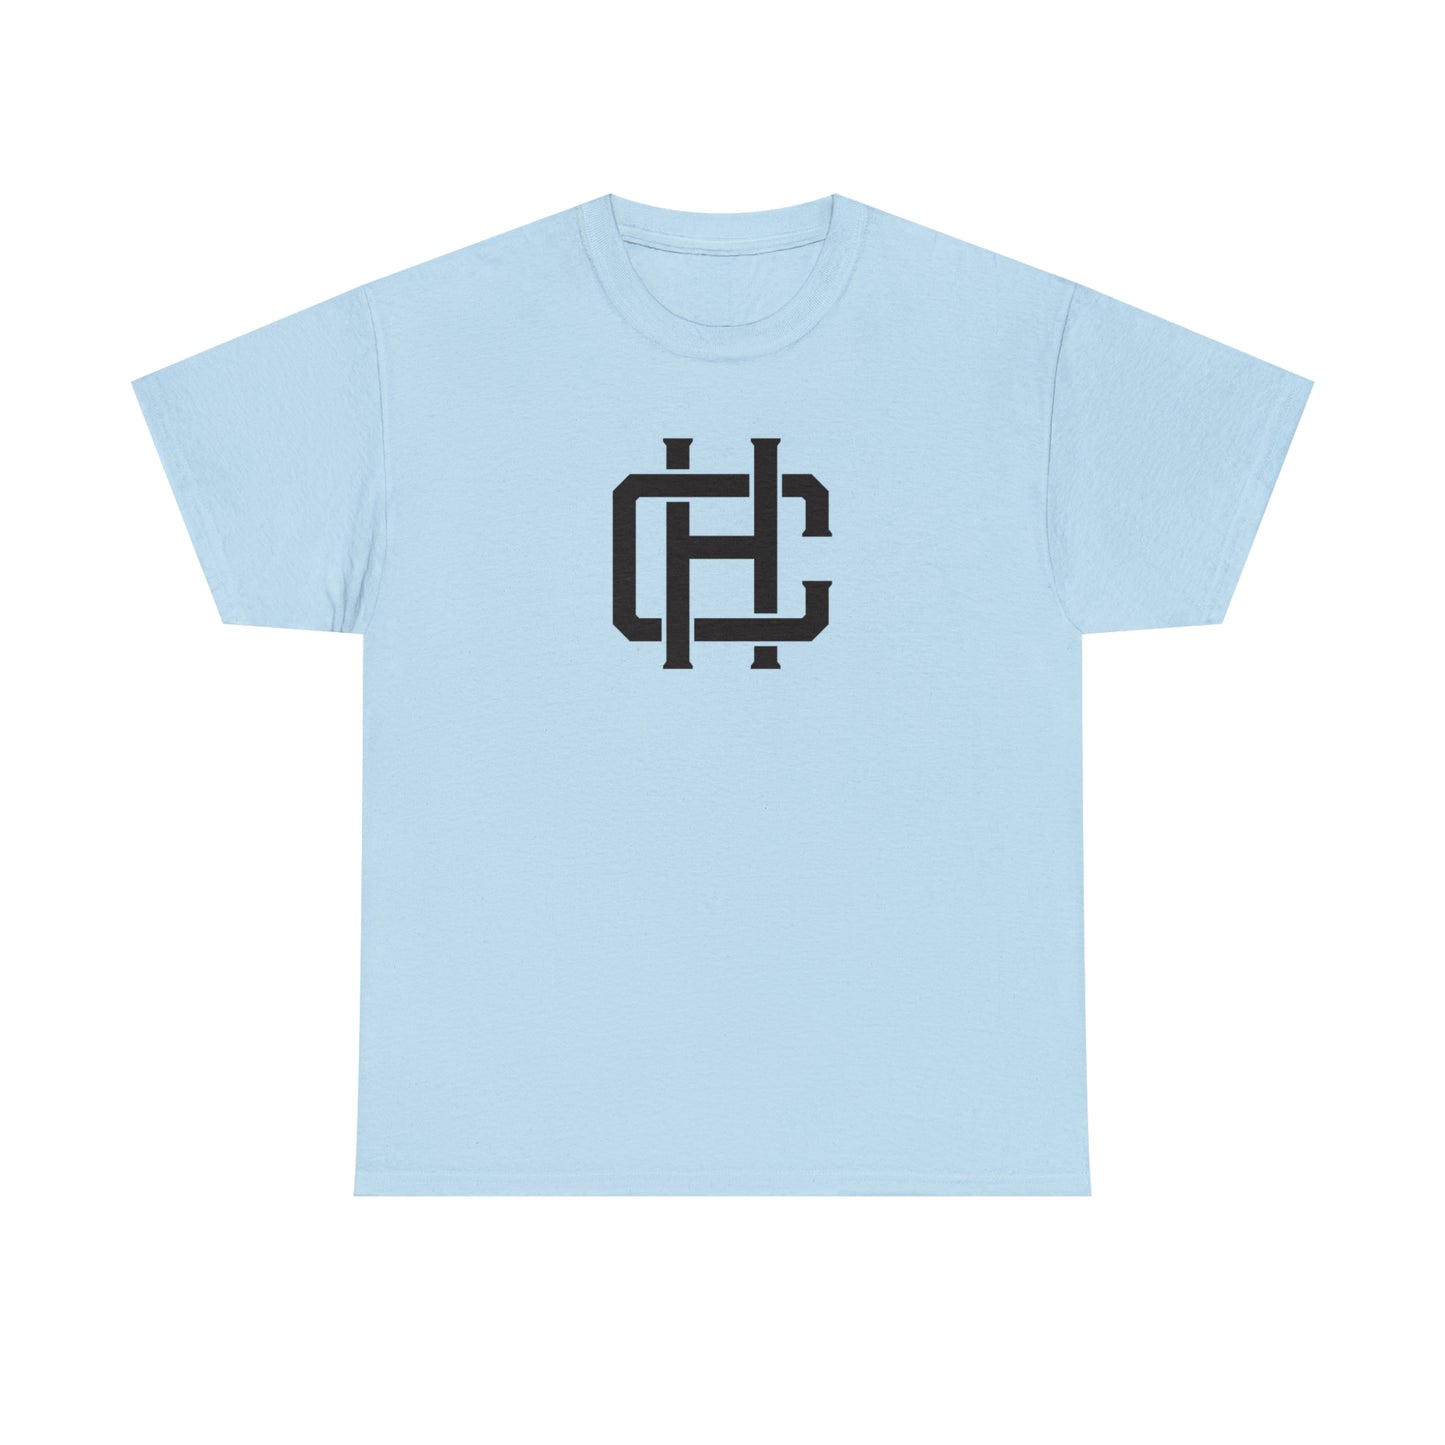 Chase Hungate "CH" Tee